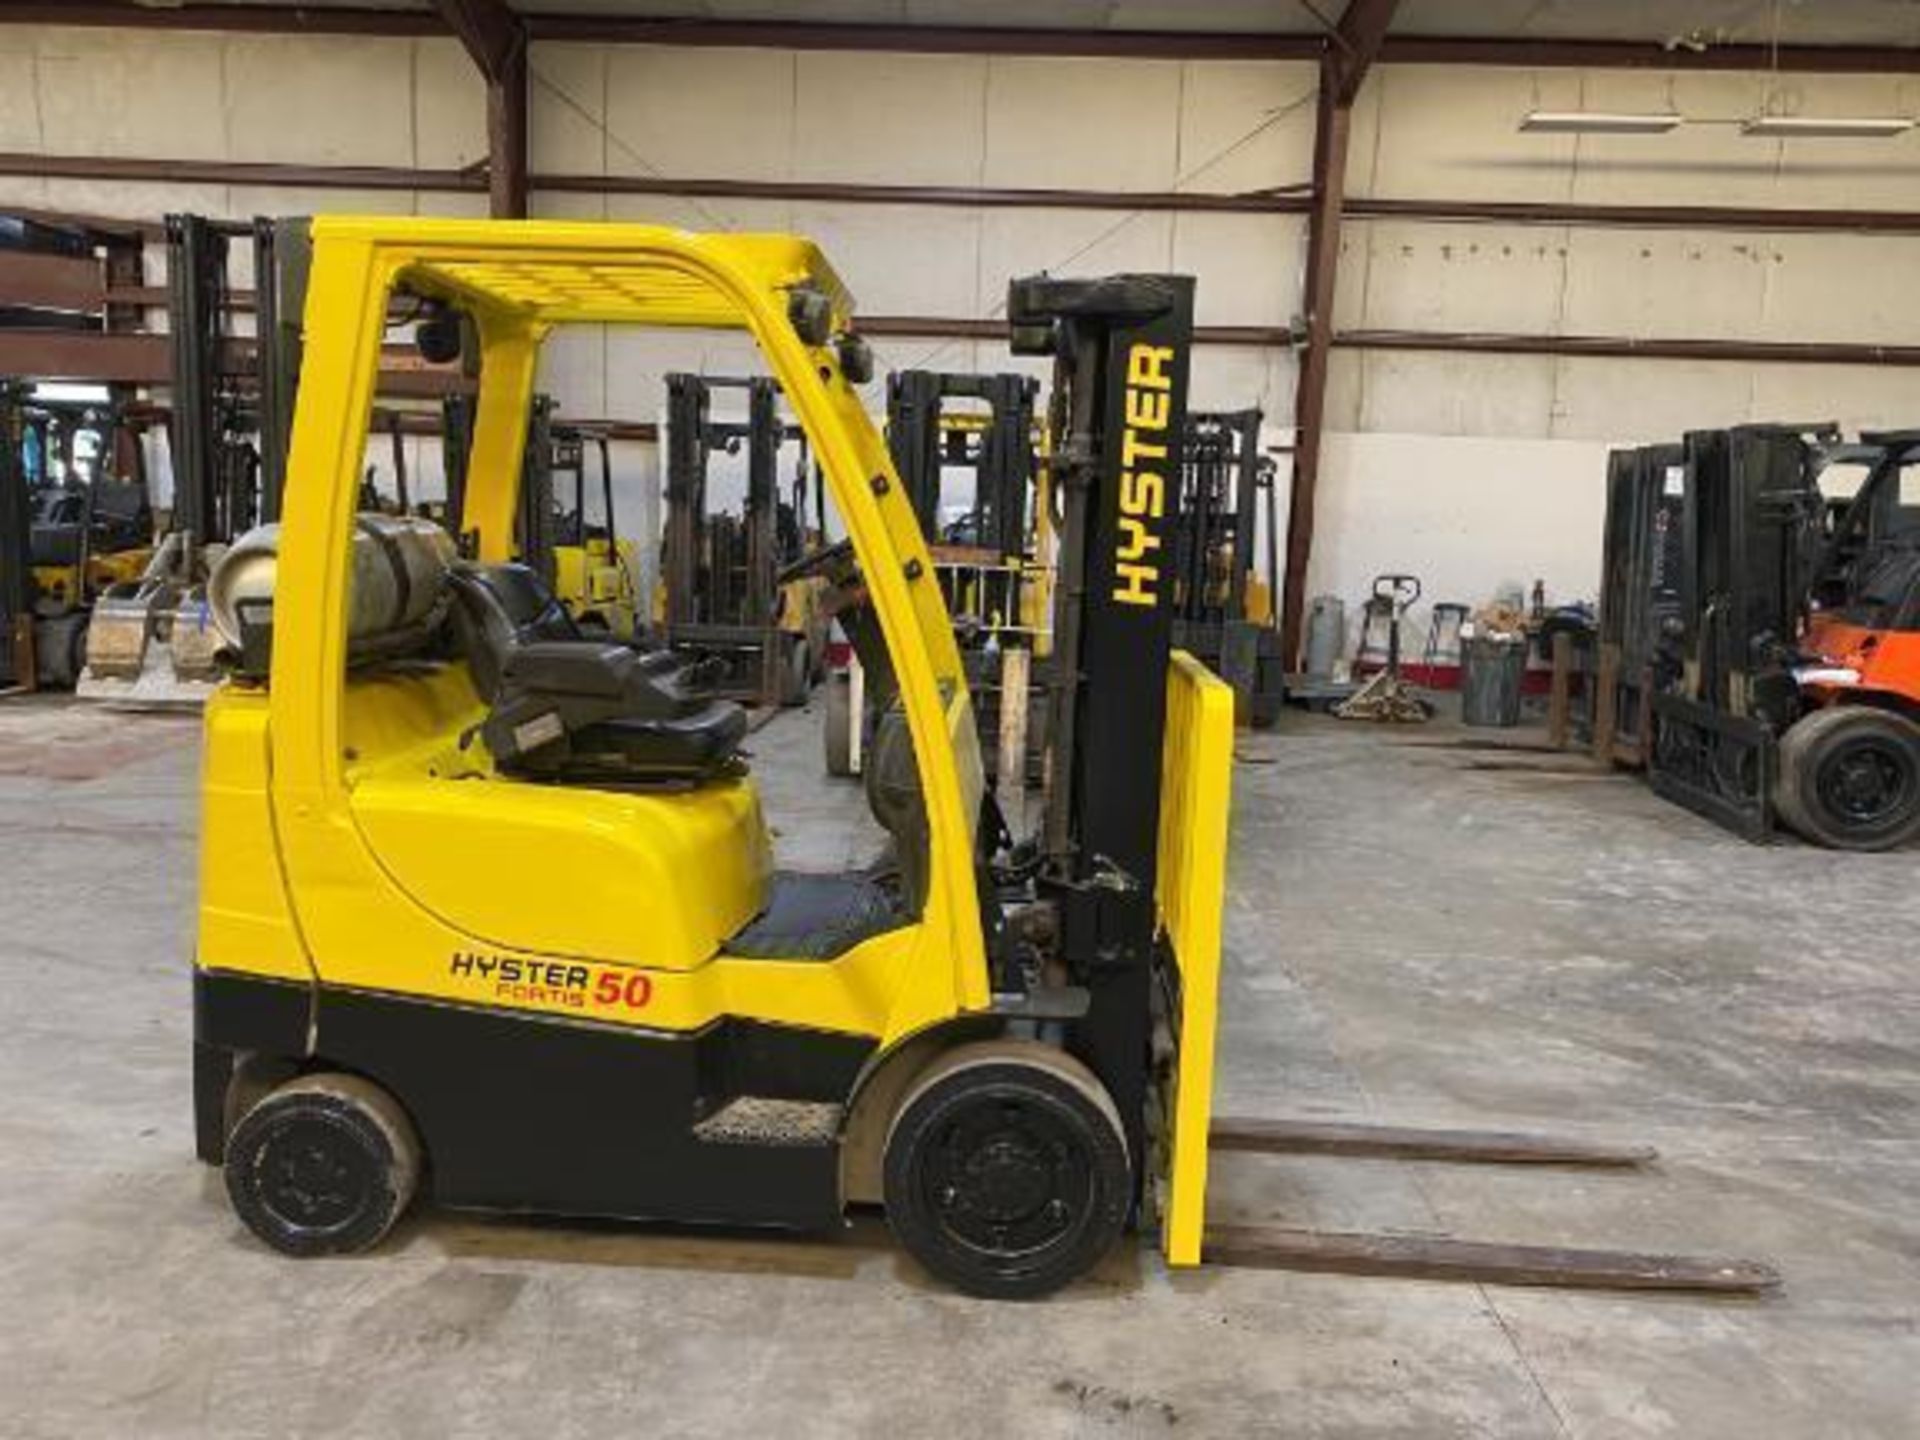 (4) HYSTER & YALE 5,000-LB. Capacity LPG Forklifts